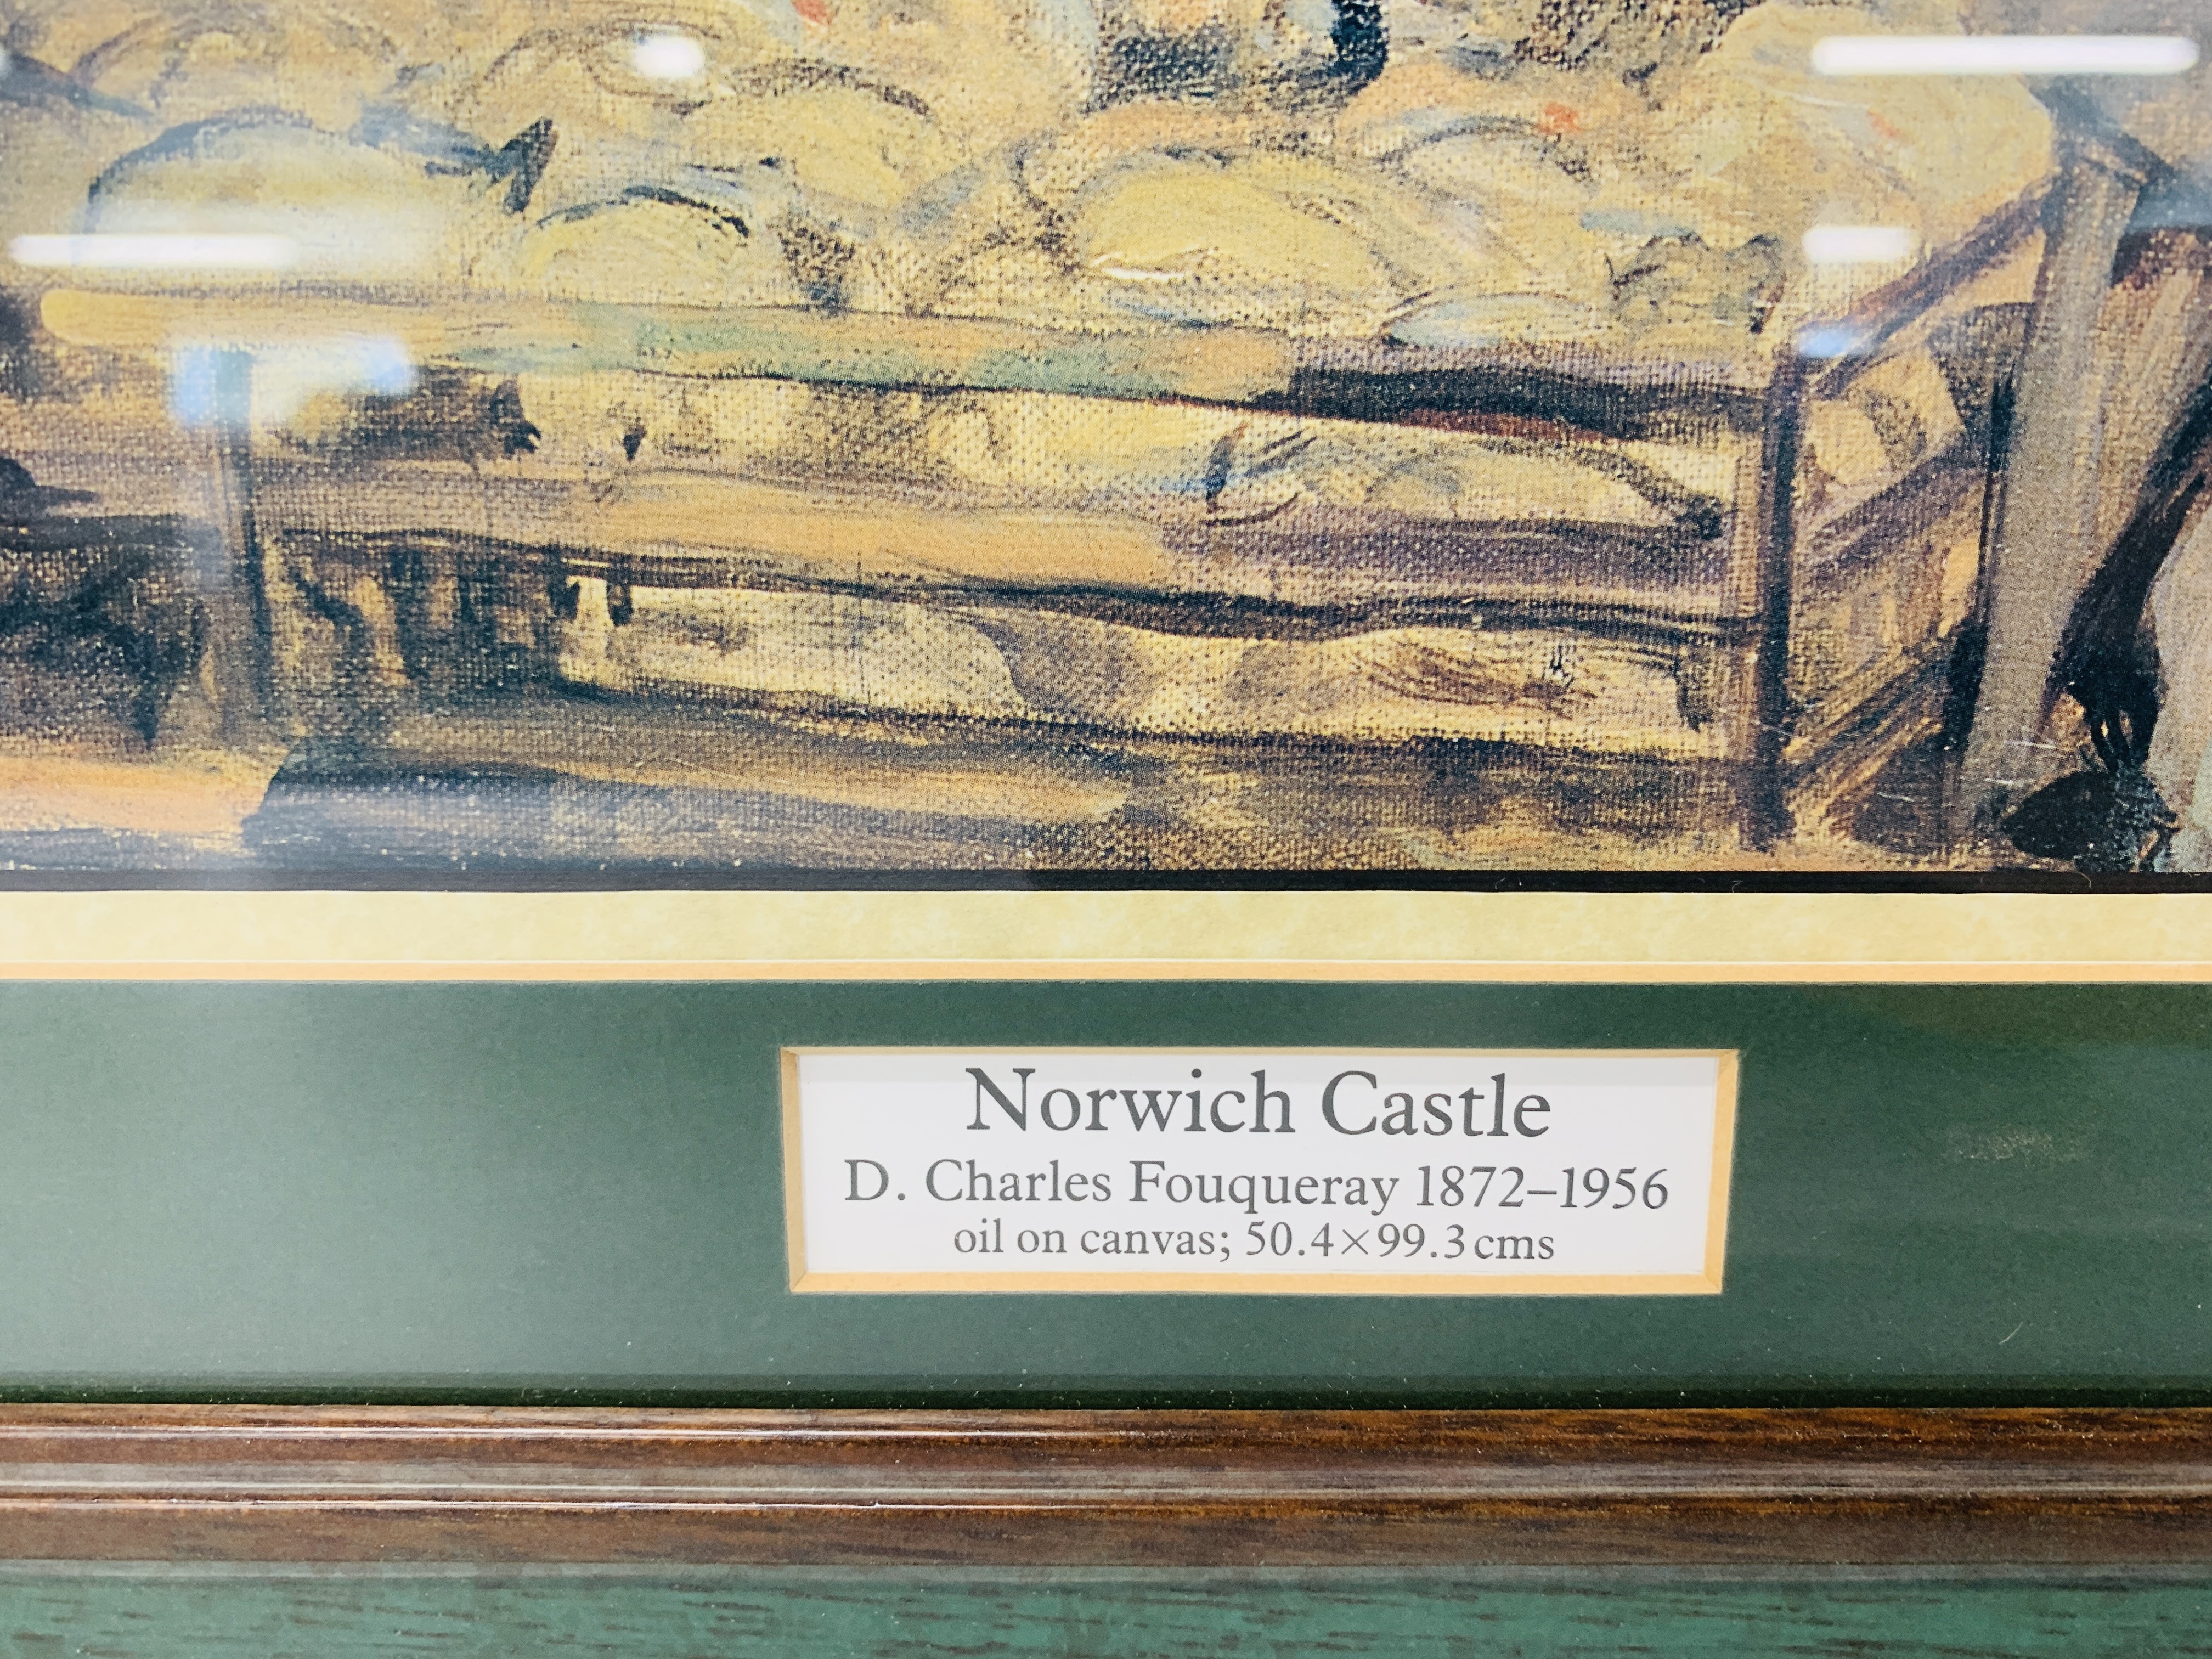 A FRAMED AND MOUNTED PRINT "NORWICH CASTLE" BY D. CHARLES FOUQUERAY 1872-1956. 78.5cm X 39.5cm. - Image 3 of 9